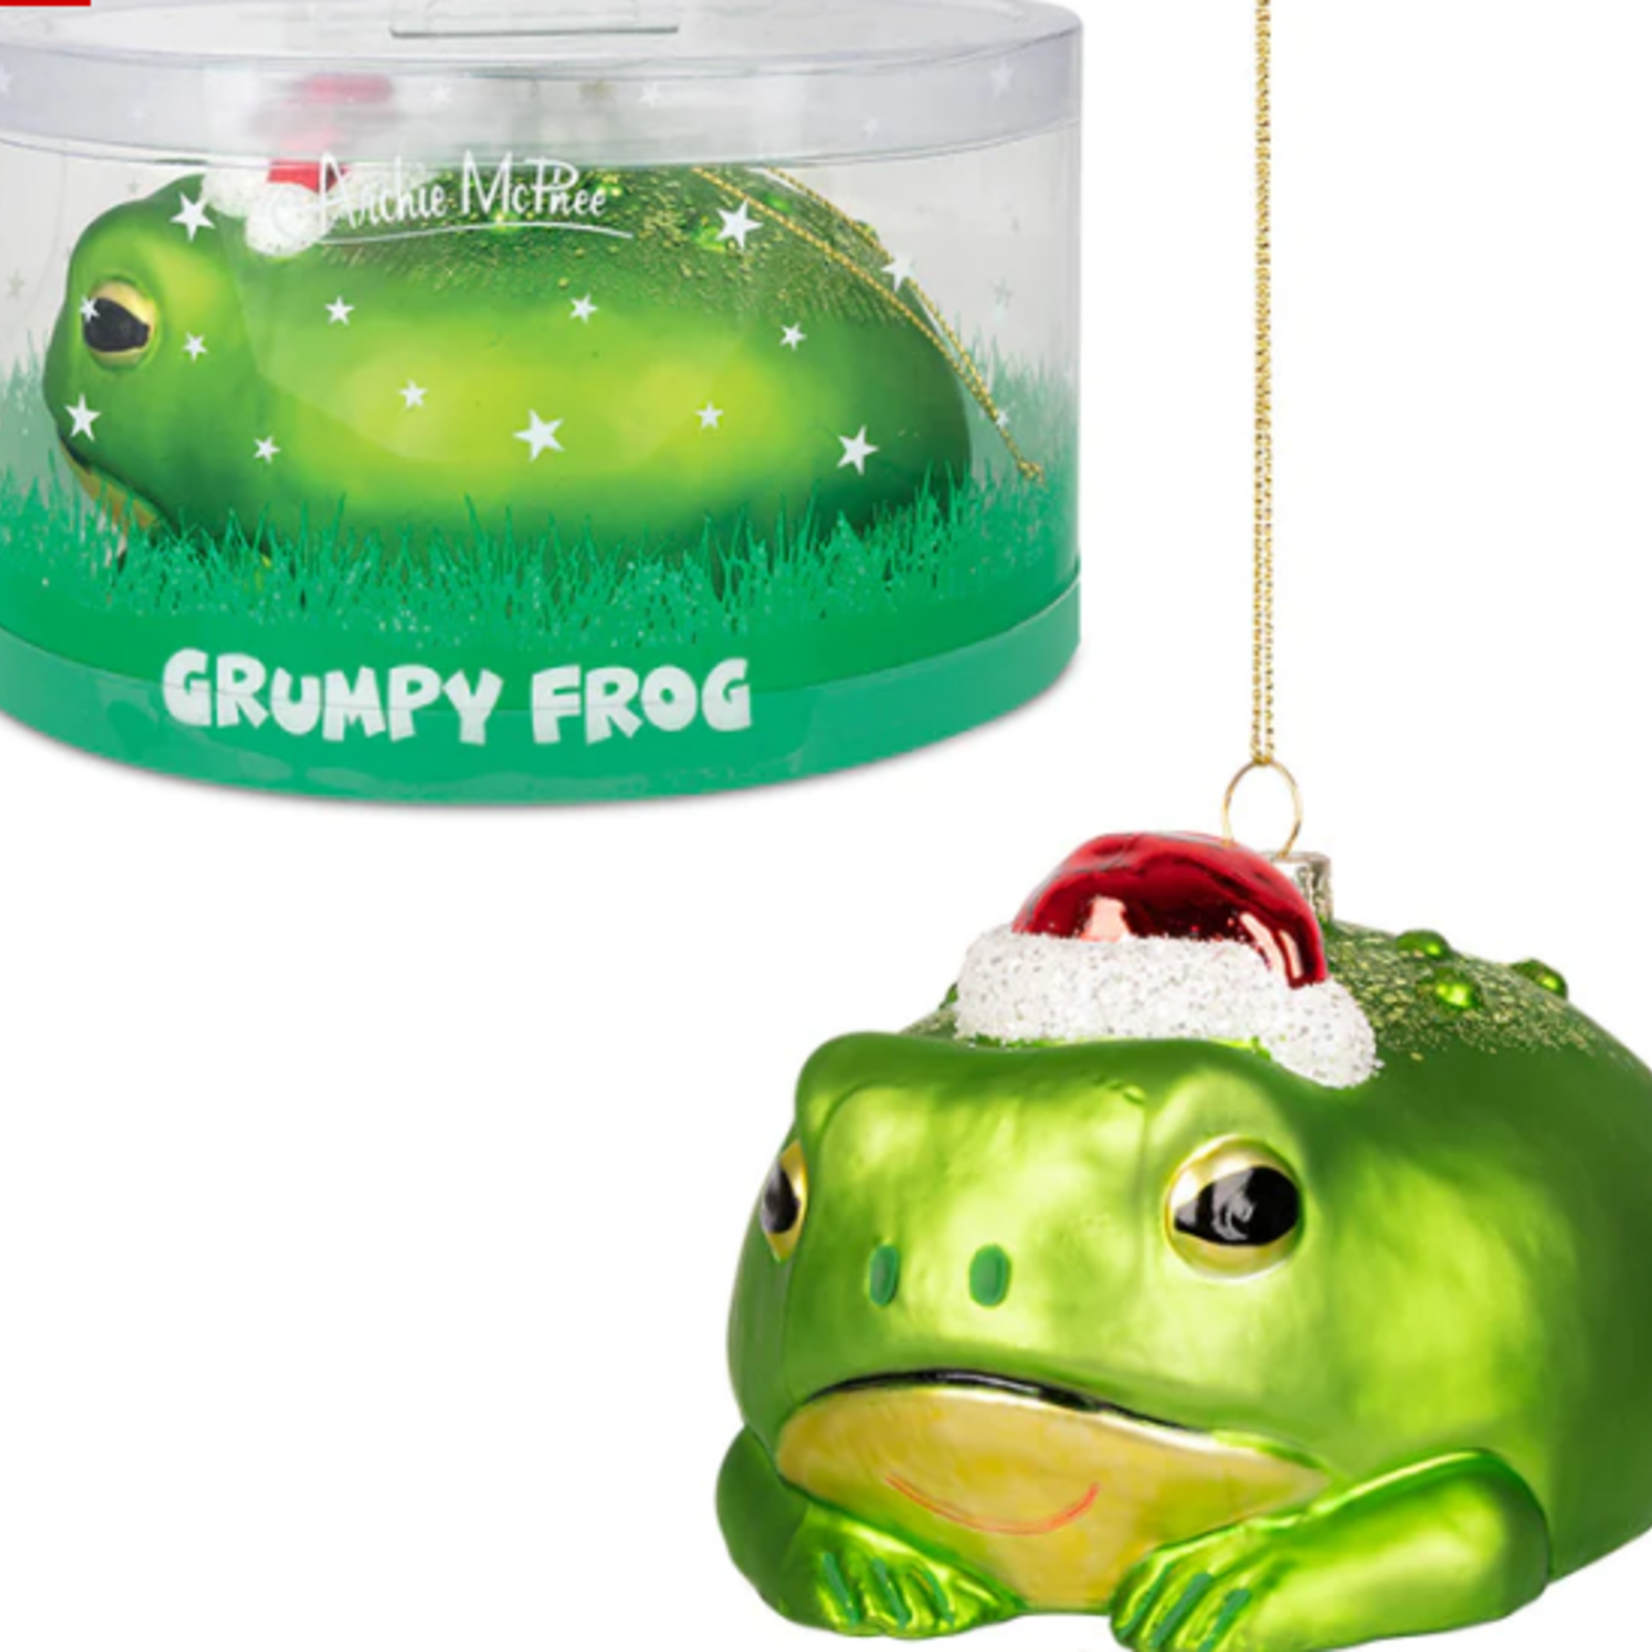 Accoutrements/Archie McPhee Grumpy Frog Ornament